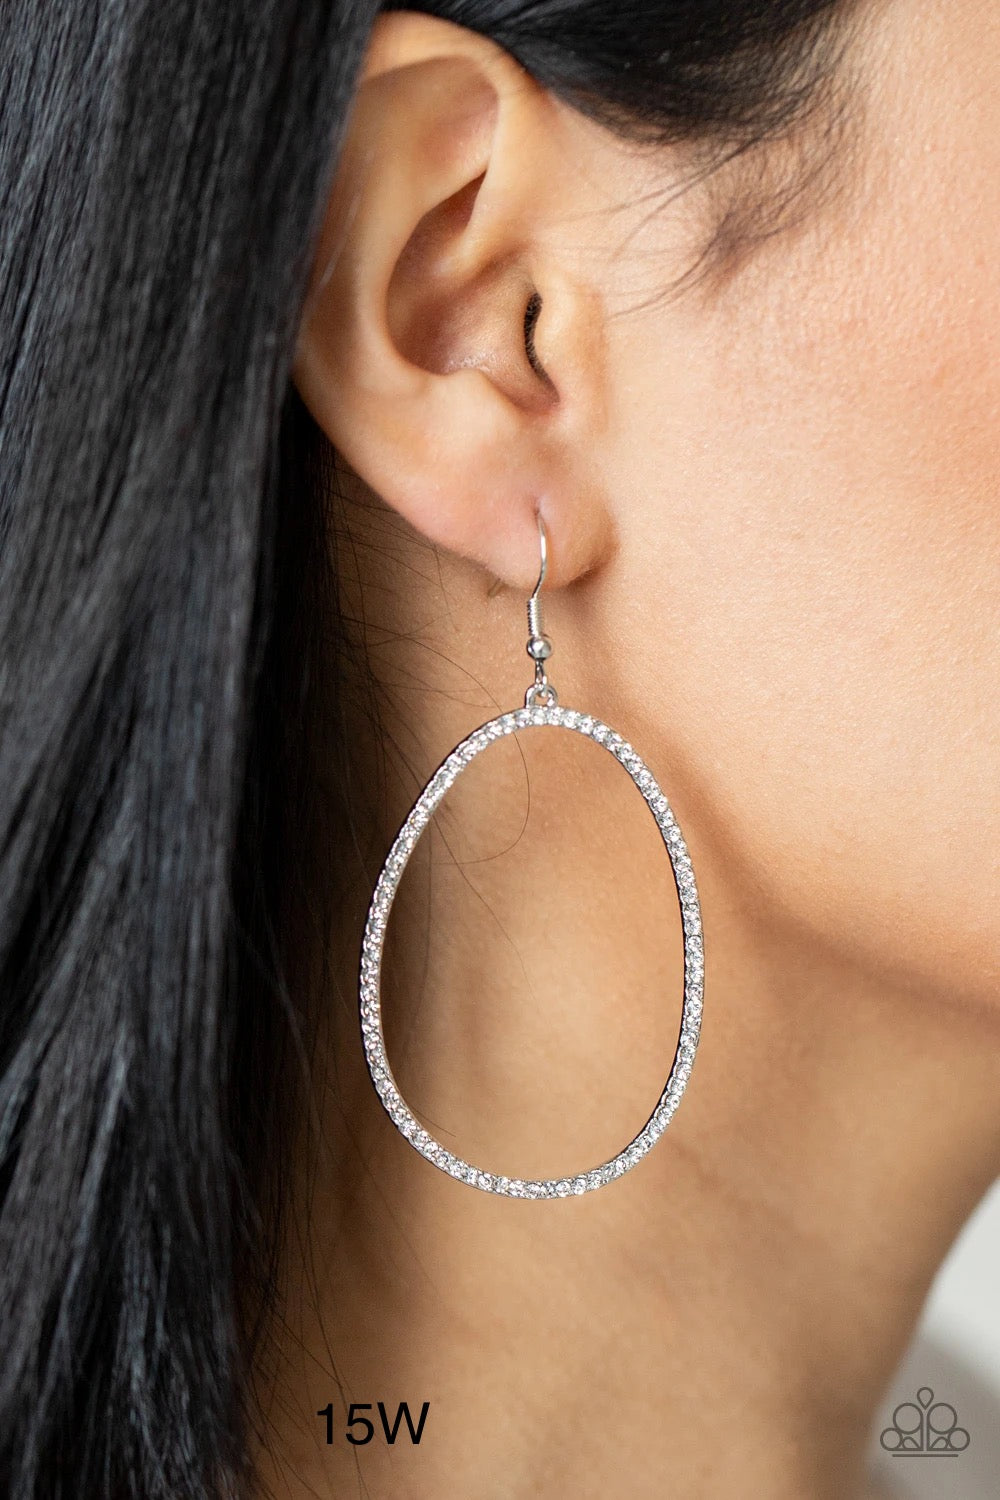 Paparazzi “OVAL-ruled!” White Dangle Earrings - CindysBlingBoutique